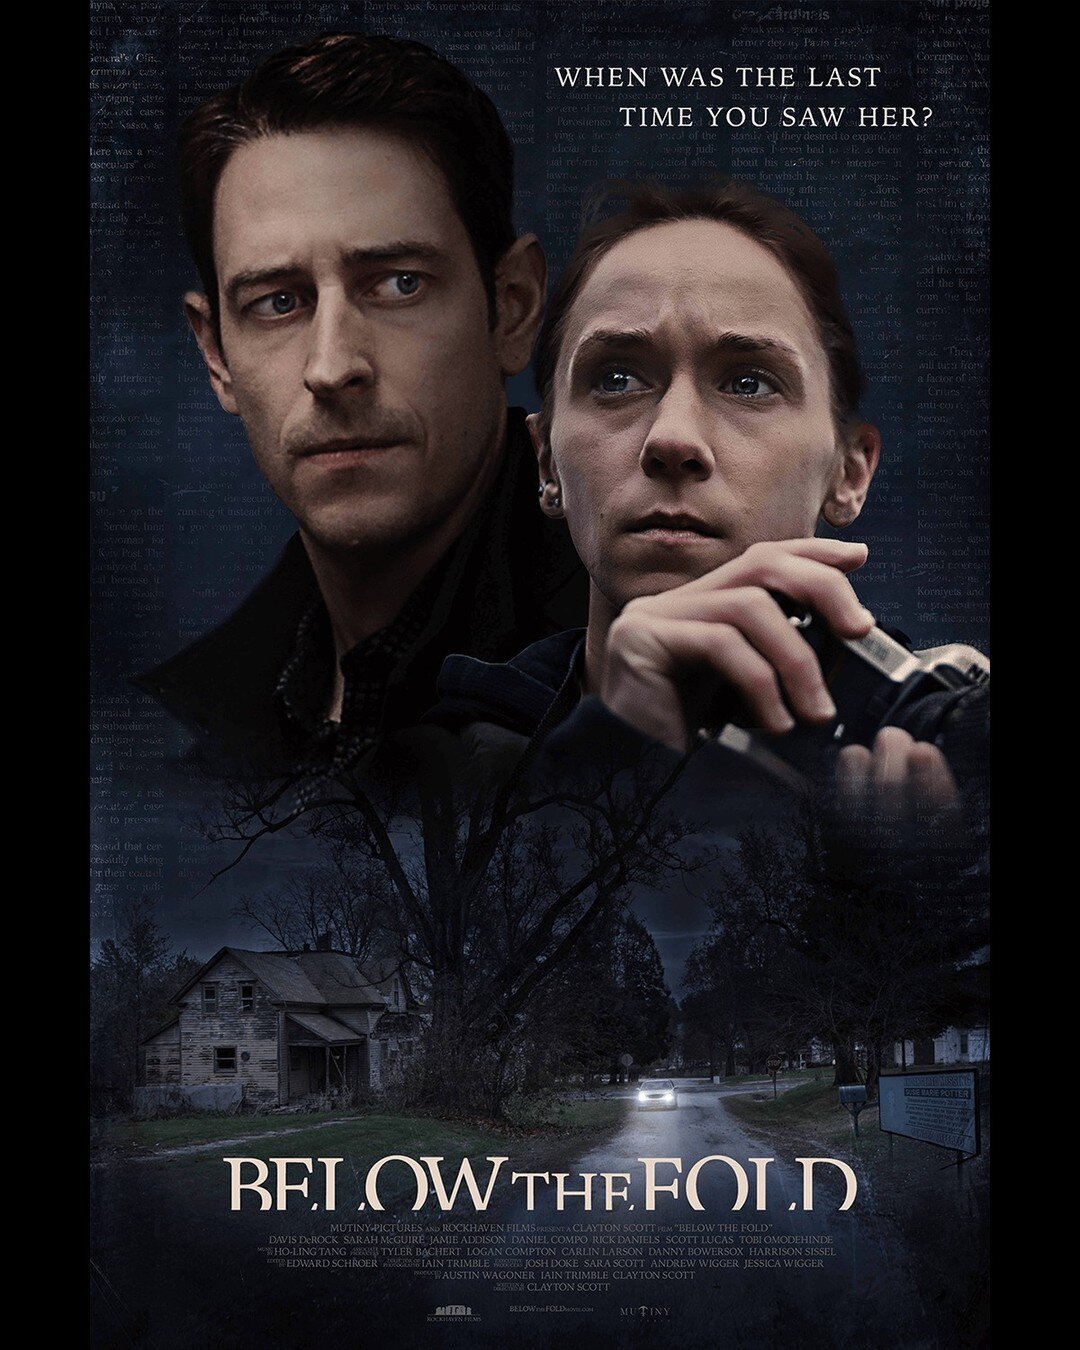 Here's your chance to see our film on the BIG SCREEN!!!

@hangar_cinema will be showing Below the Fold THIS Friday and Saturday at 7pm.

Q&amp;A from cast/crew to follow each showing! We hope to see you there!
#belowthefoldmovie @mutinypics